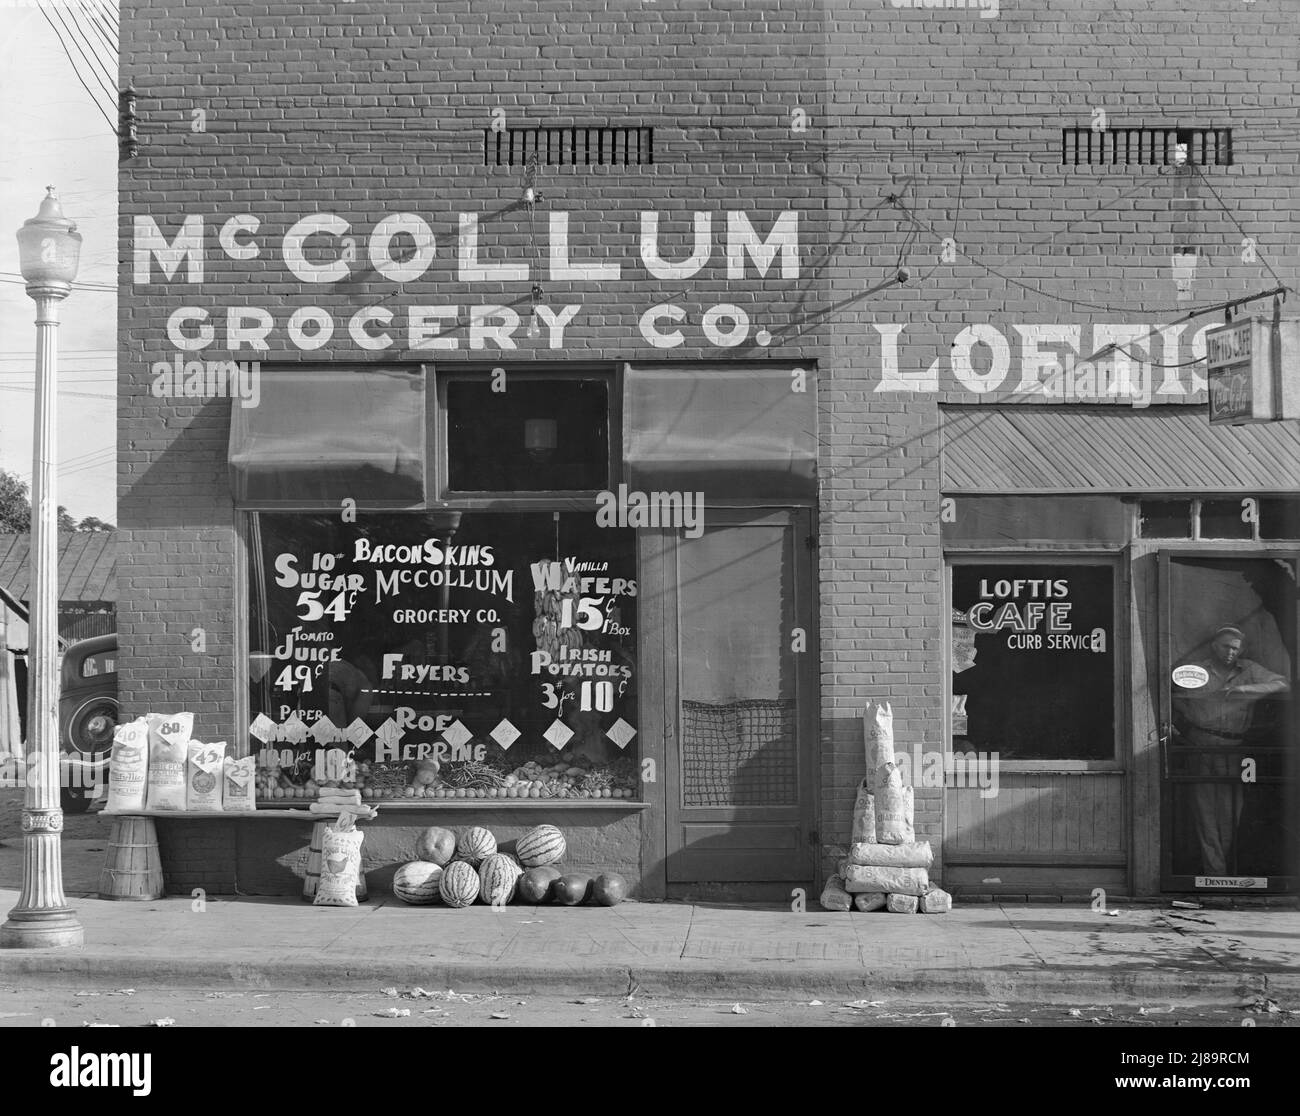 Grocery store. Greensboro, Alabama. ['McCollum Grocery Co.; Sugar, Tomato Juice; Paper Napkins; Bacon Skins; Fyers; Roe Herring; Vanilla Wafers; Irish Potatoes'. On display: sacks of flour and chicken feed, watermelons, beans, bananas. Next door: 'Loftis Cafe - Curb Service']. Stock Photo